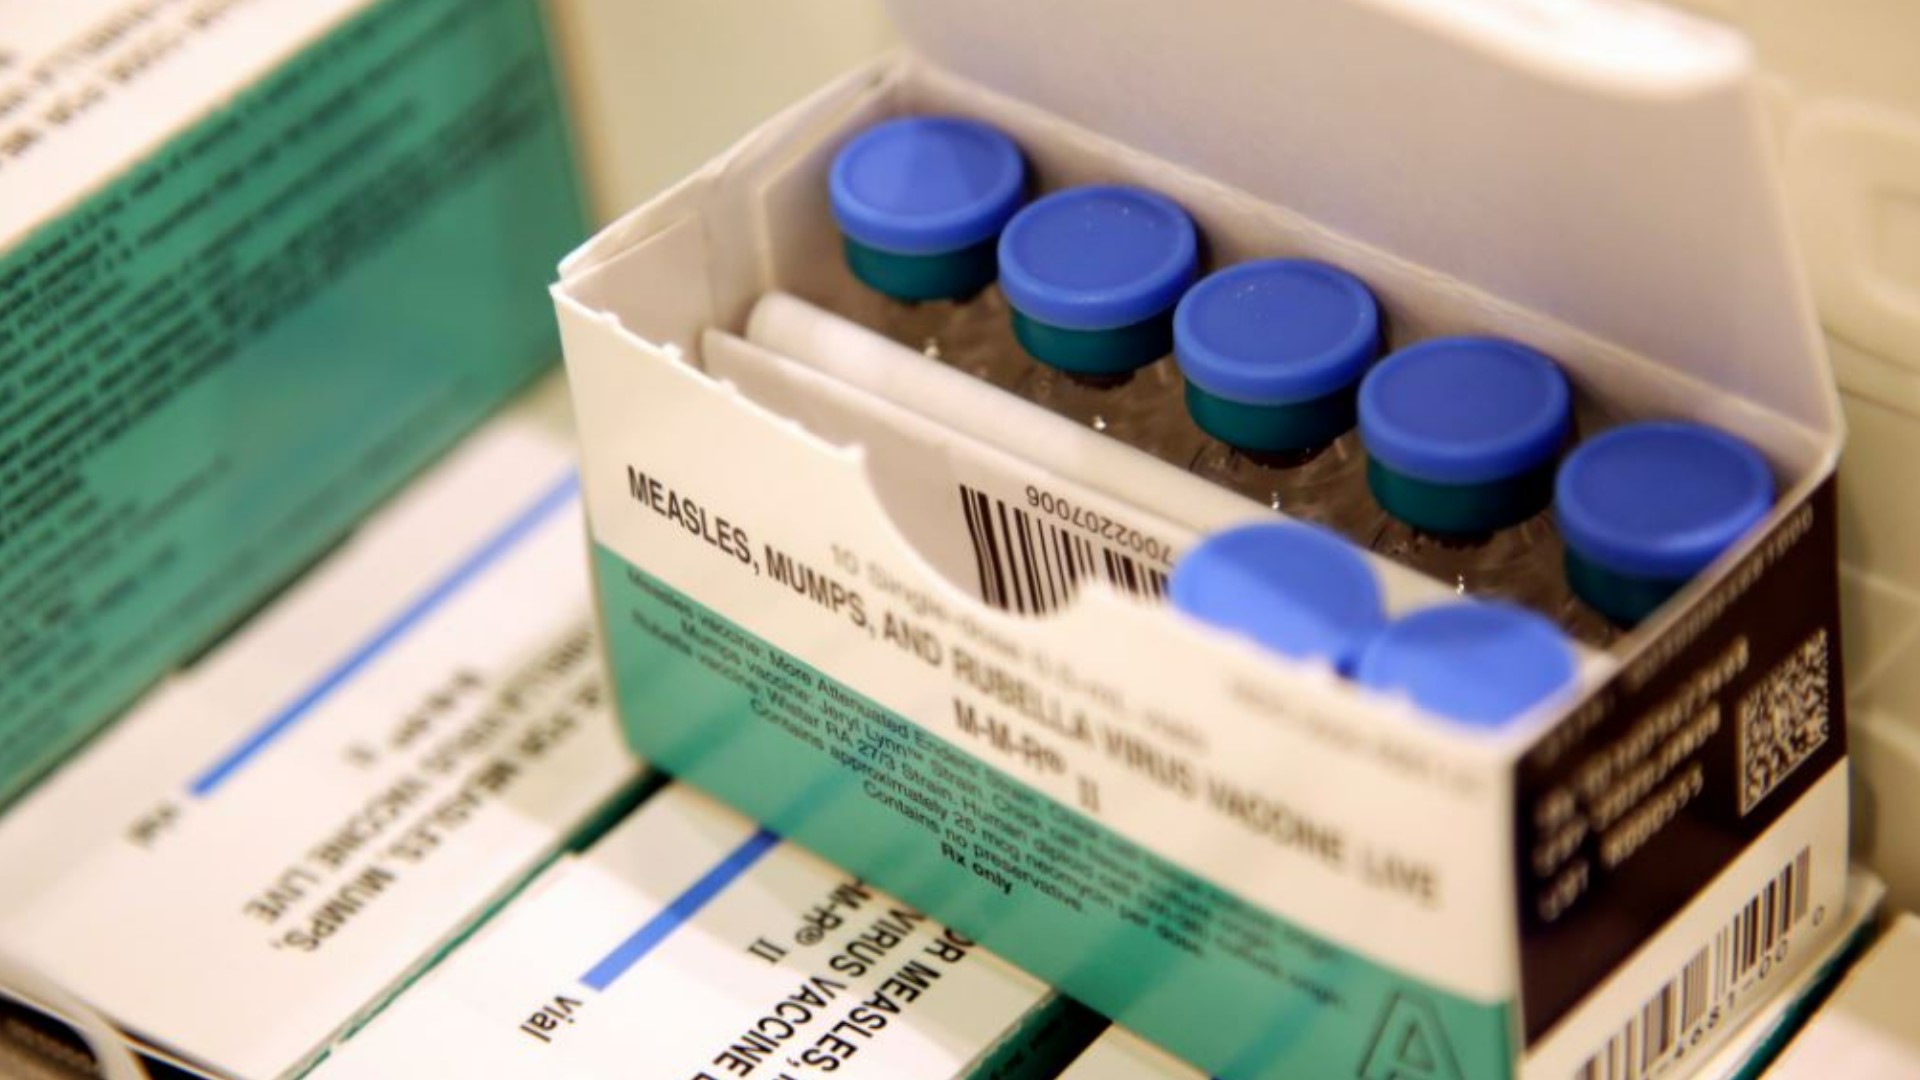 Columbus Public Health is investigating 19 confirmed cases of measles in children involving more child care facilities and schools.